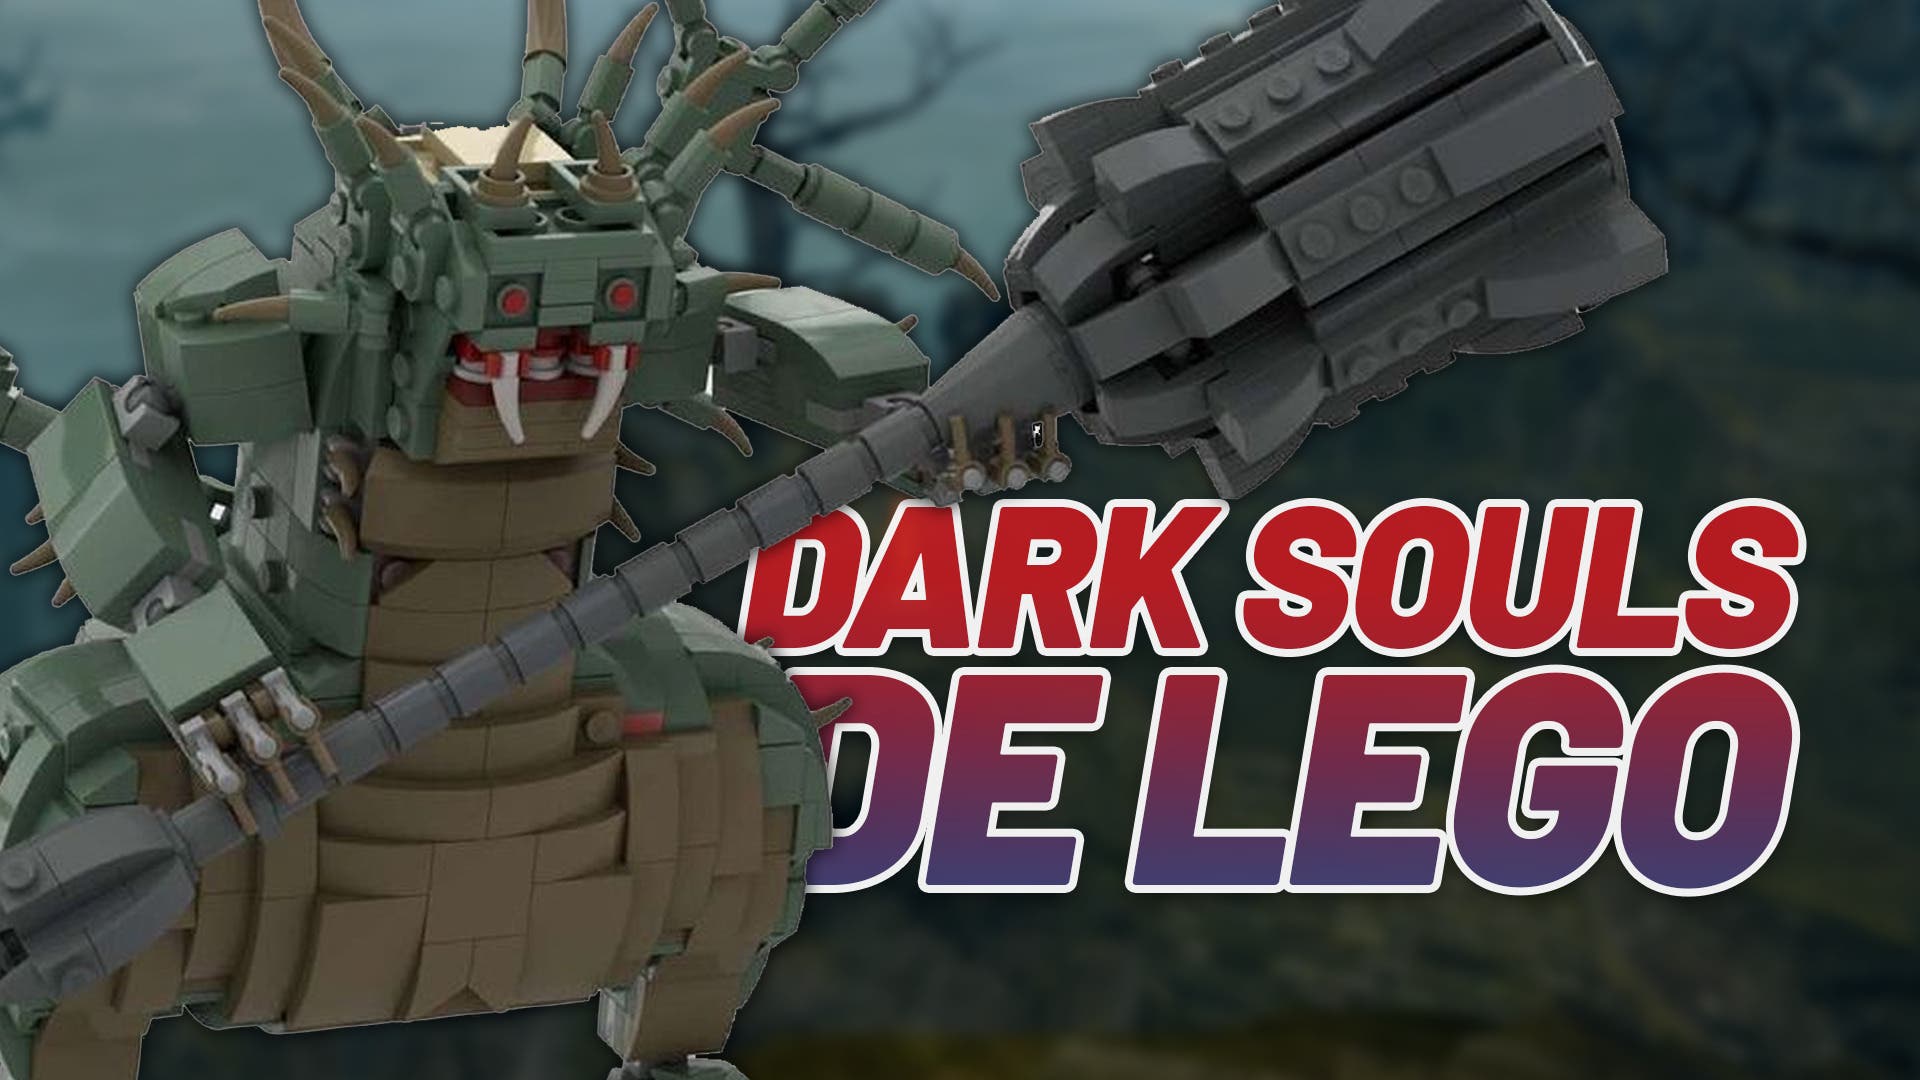 This is how the Dark Souls Firelink Shrine is built entirely out of Lego